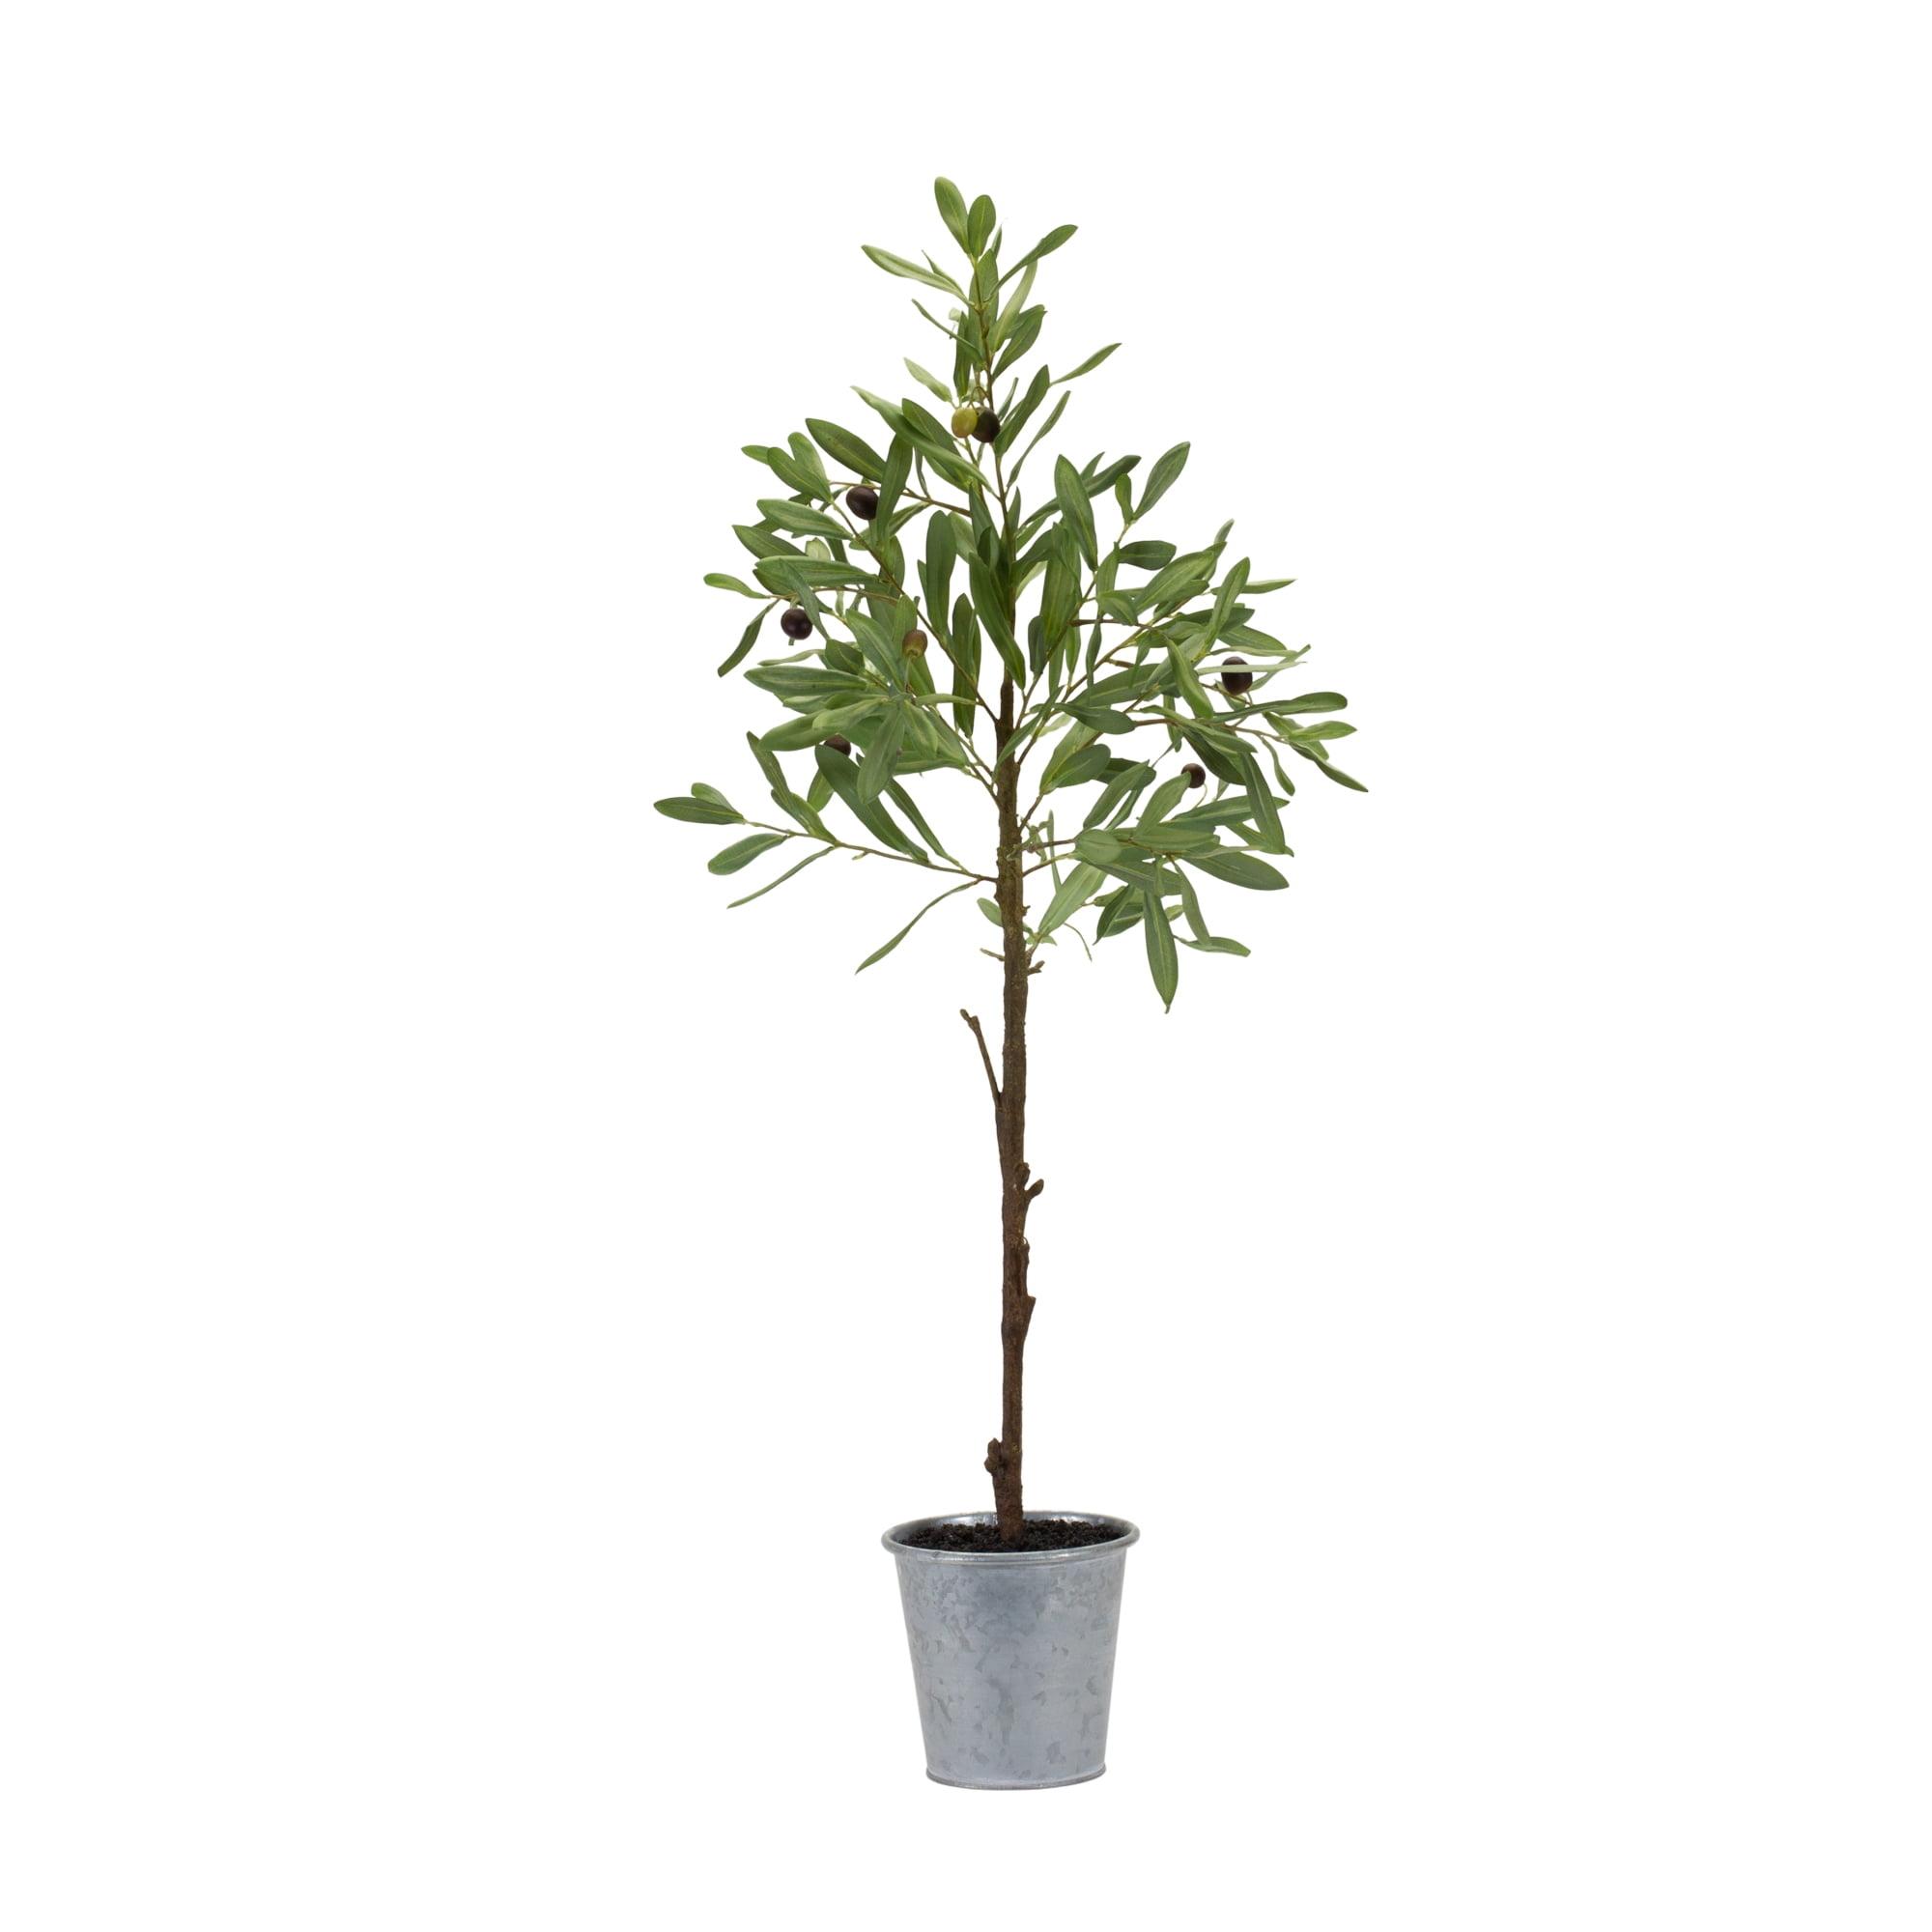 Elegant Silk Potted Olive Tree in Traditional Silver Container, 31.5"H